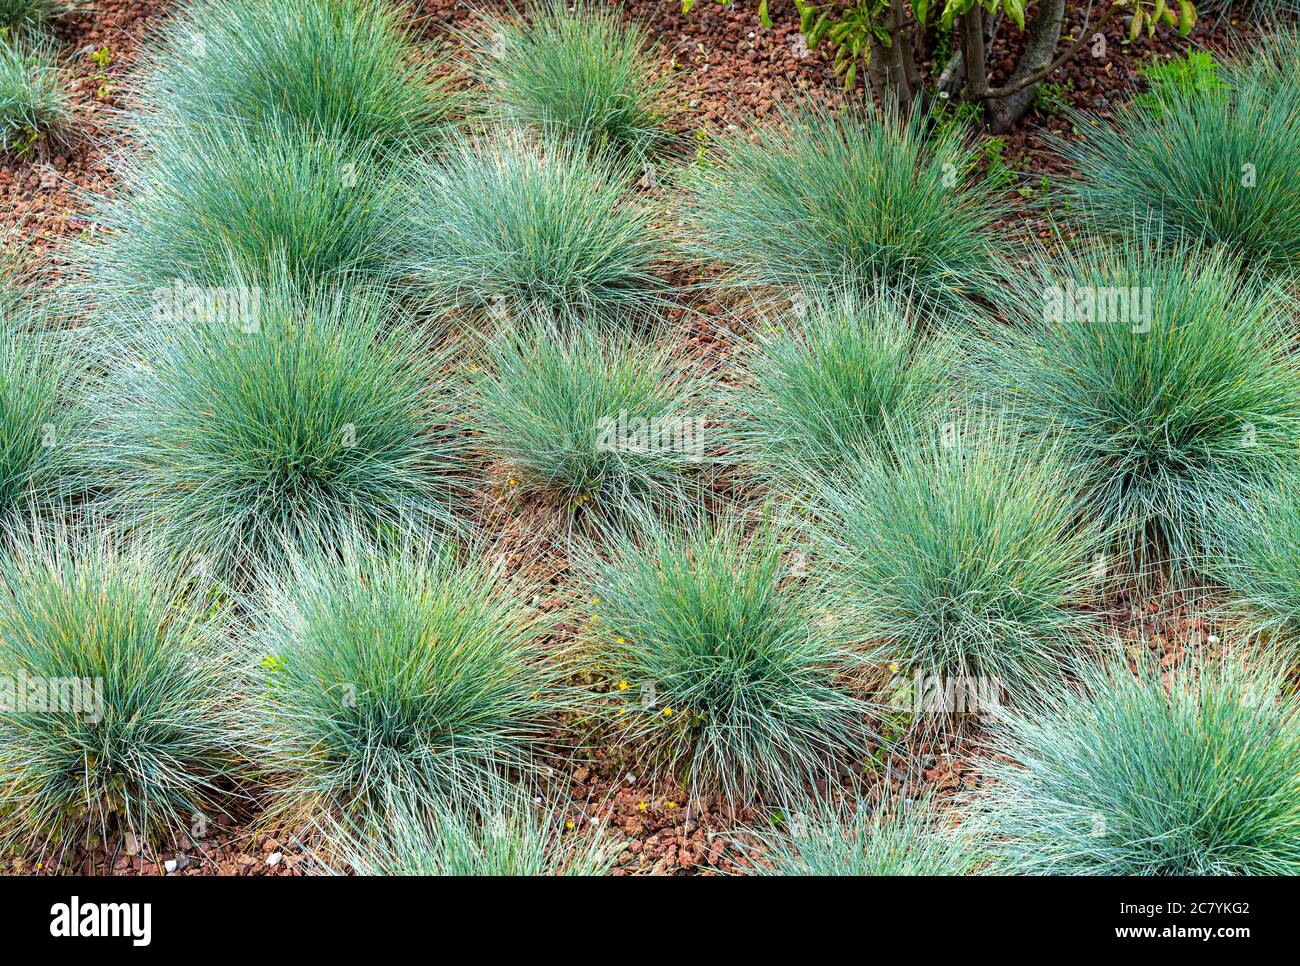 Festuca glauca, commonly known as blue fescue, is a species of flowering plant in the grass family, Poaceae. Stock Photo